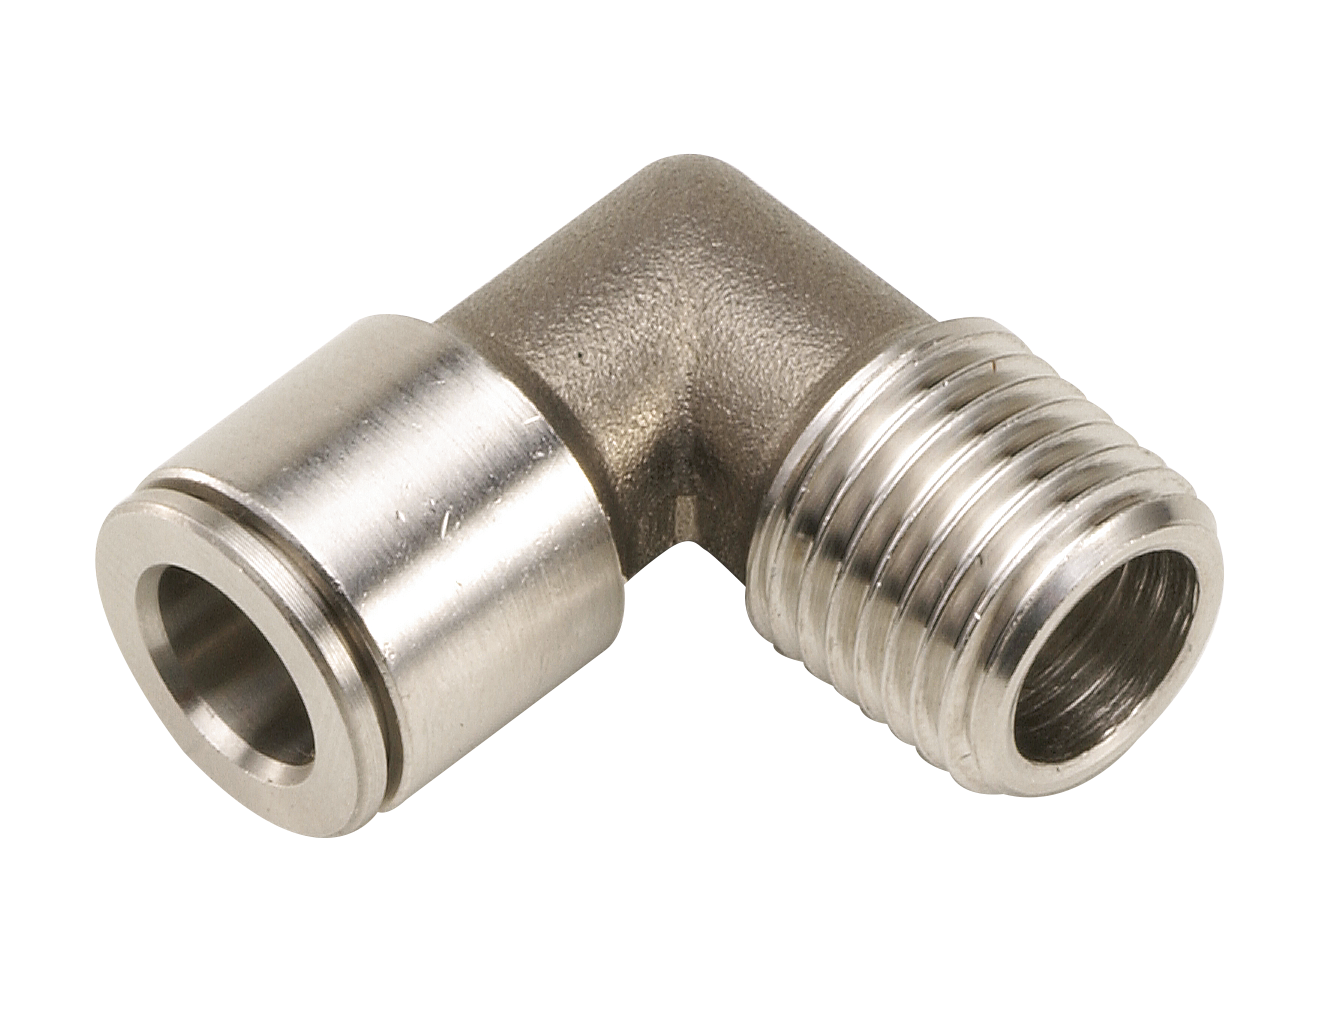 Implantation’s fittings MALE ELBOW FITTING, TAPER Fittings and quick-connect couplings